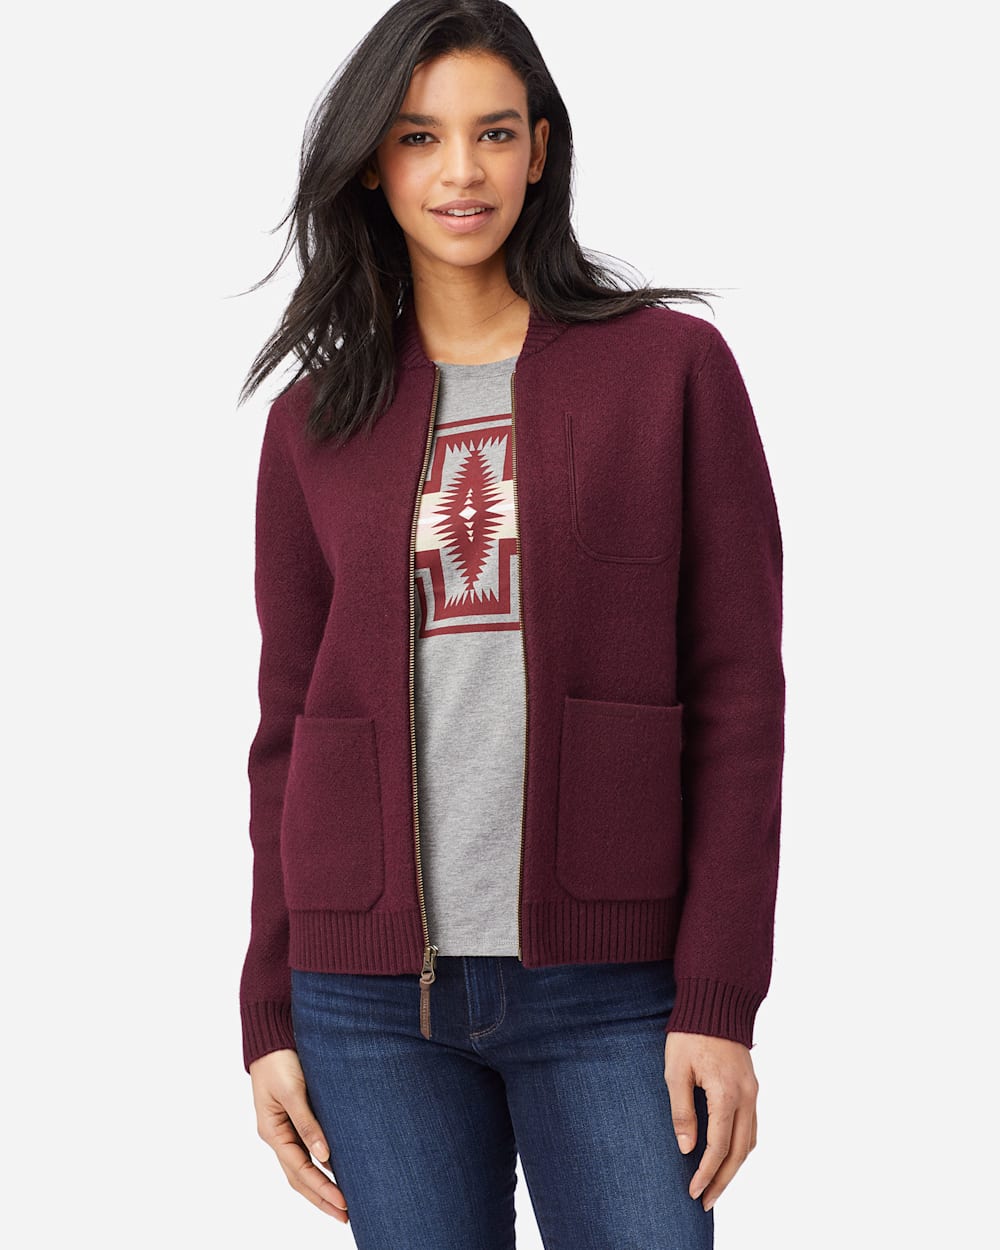 ALTERNATE VIEW OF WOMEN'S BOILED WOOL BOMBER JACKET IN WINE image number 3